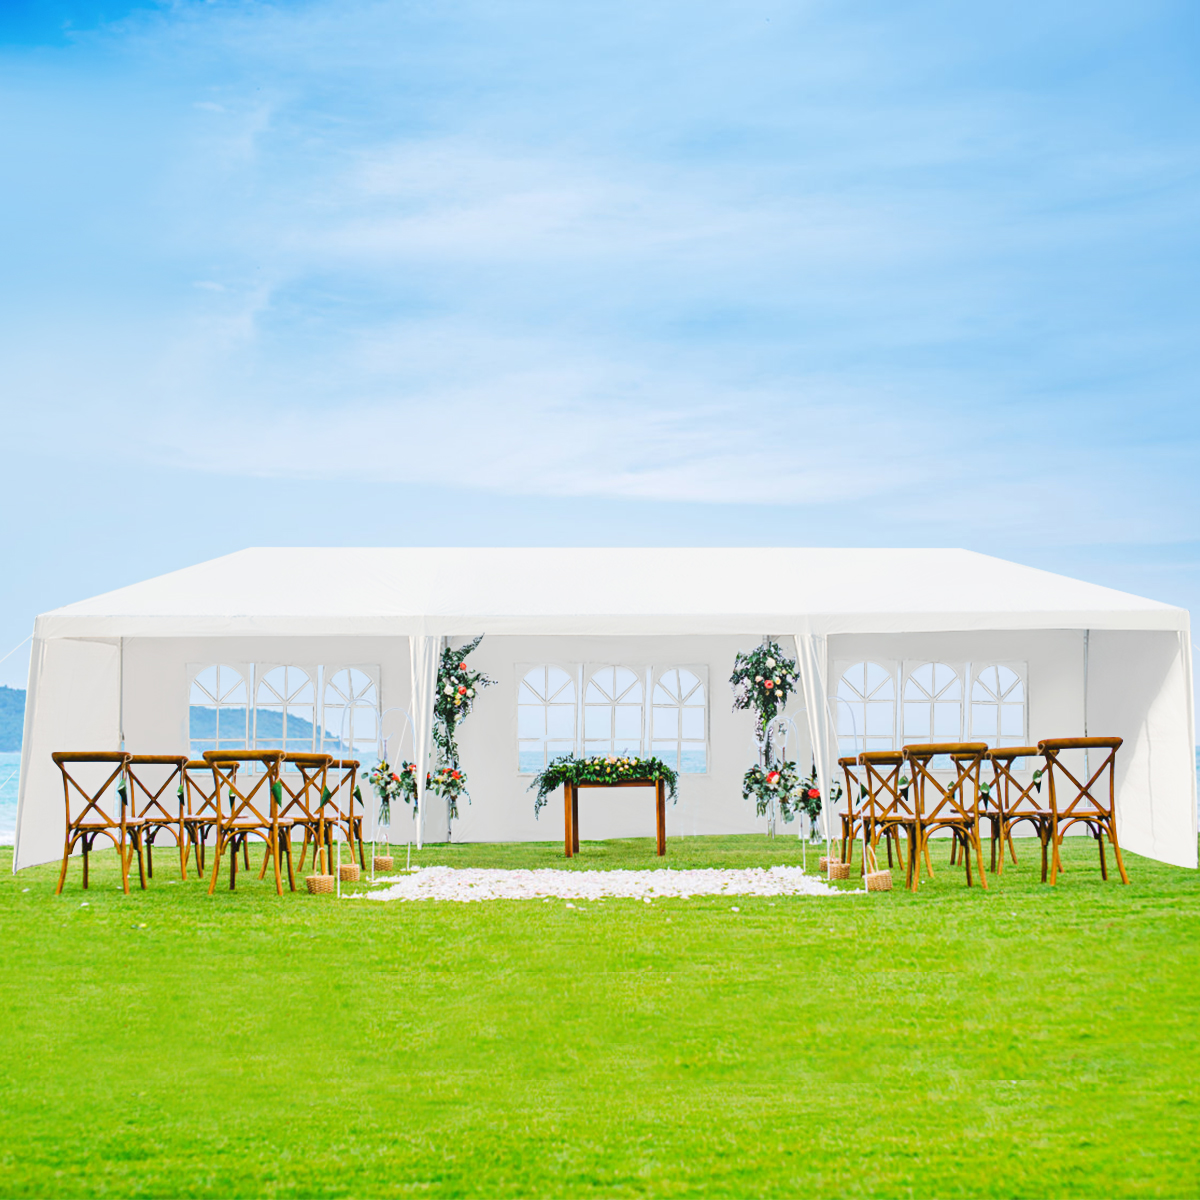 Topbuy 10' x 30' Outdoor Wedding Party Event Tent with 6 Removable Side Walls & 2 Doorways